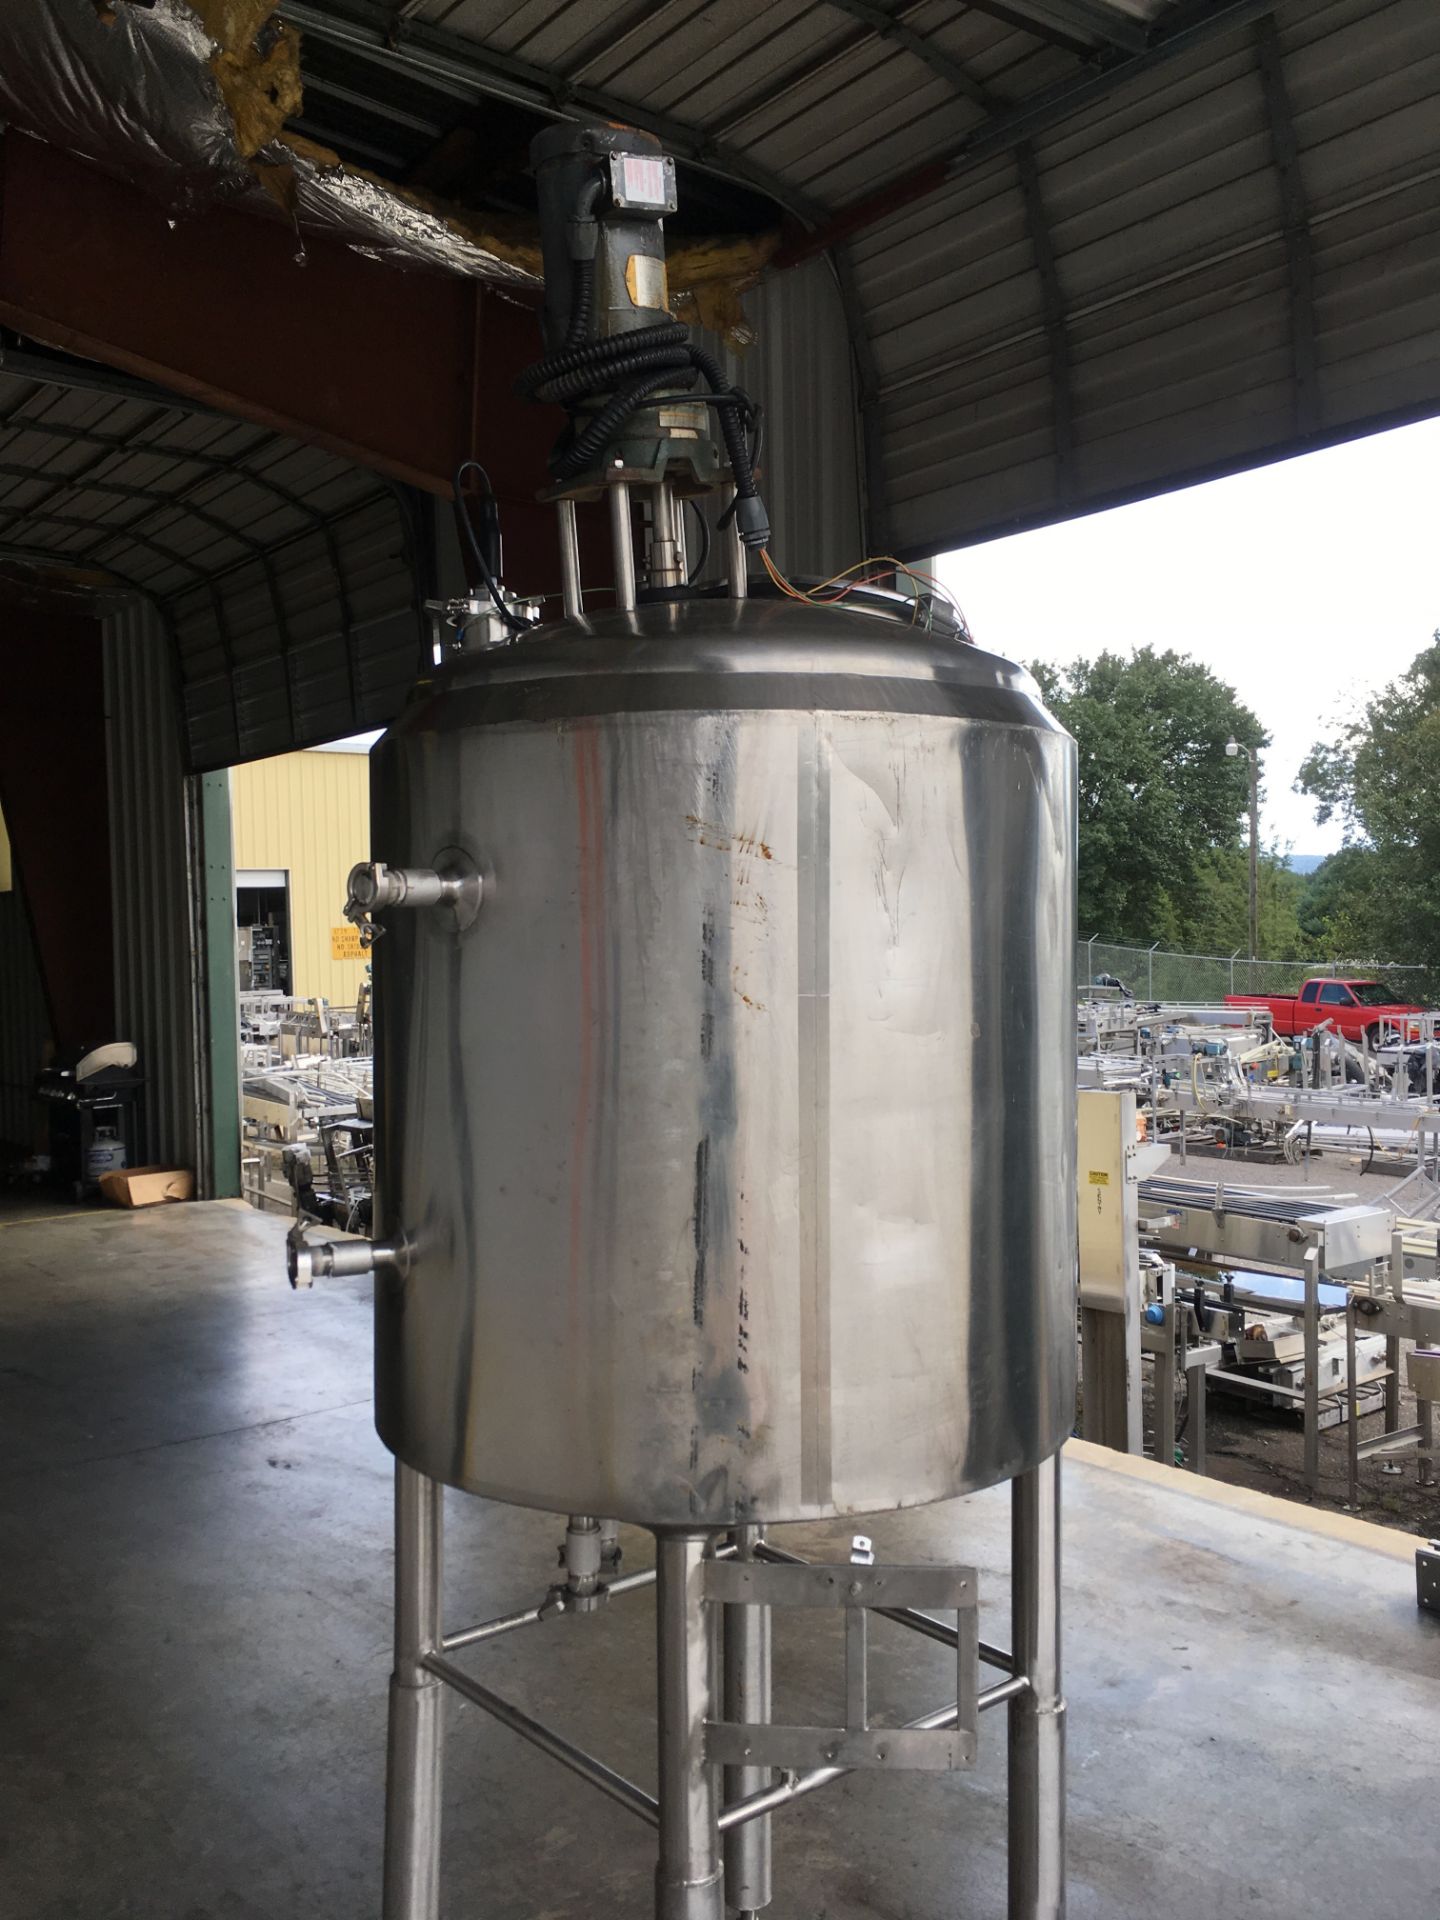 200 Gallon Stainless Steel Jacketed Tank with Top Mixer, Top Manhole, High Shear Mixer Blade, Baldor - Image 2 of 10